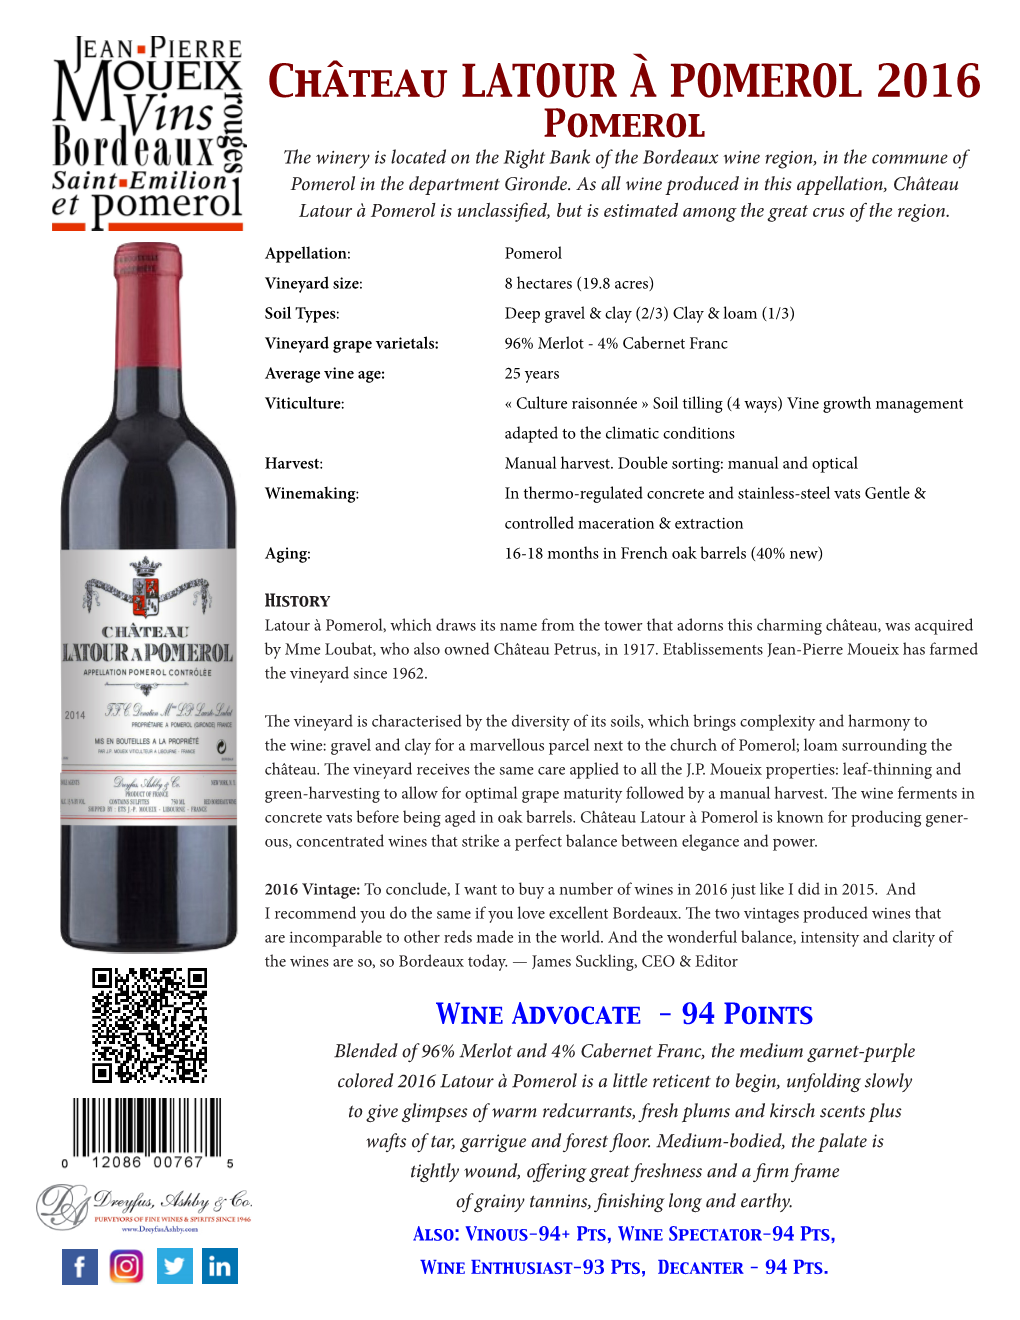 Château LATOUR À POMEROL 2016 Pomerol the Winery Is Located on the Right Bank of the Bordeaux Wine Region, in the Commune of Pomerol in the Department Gironde